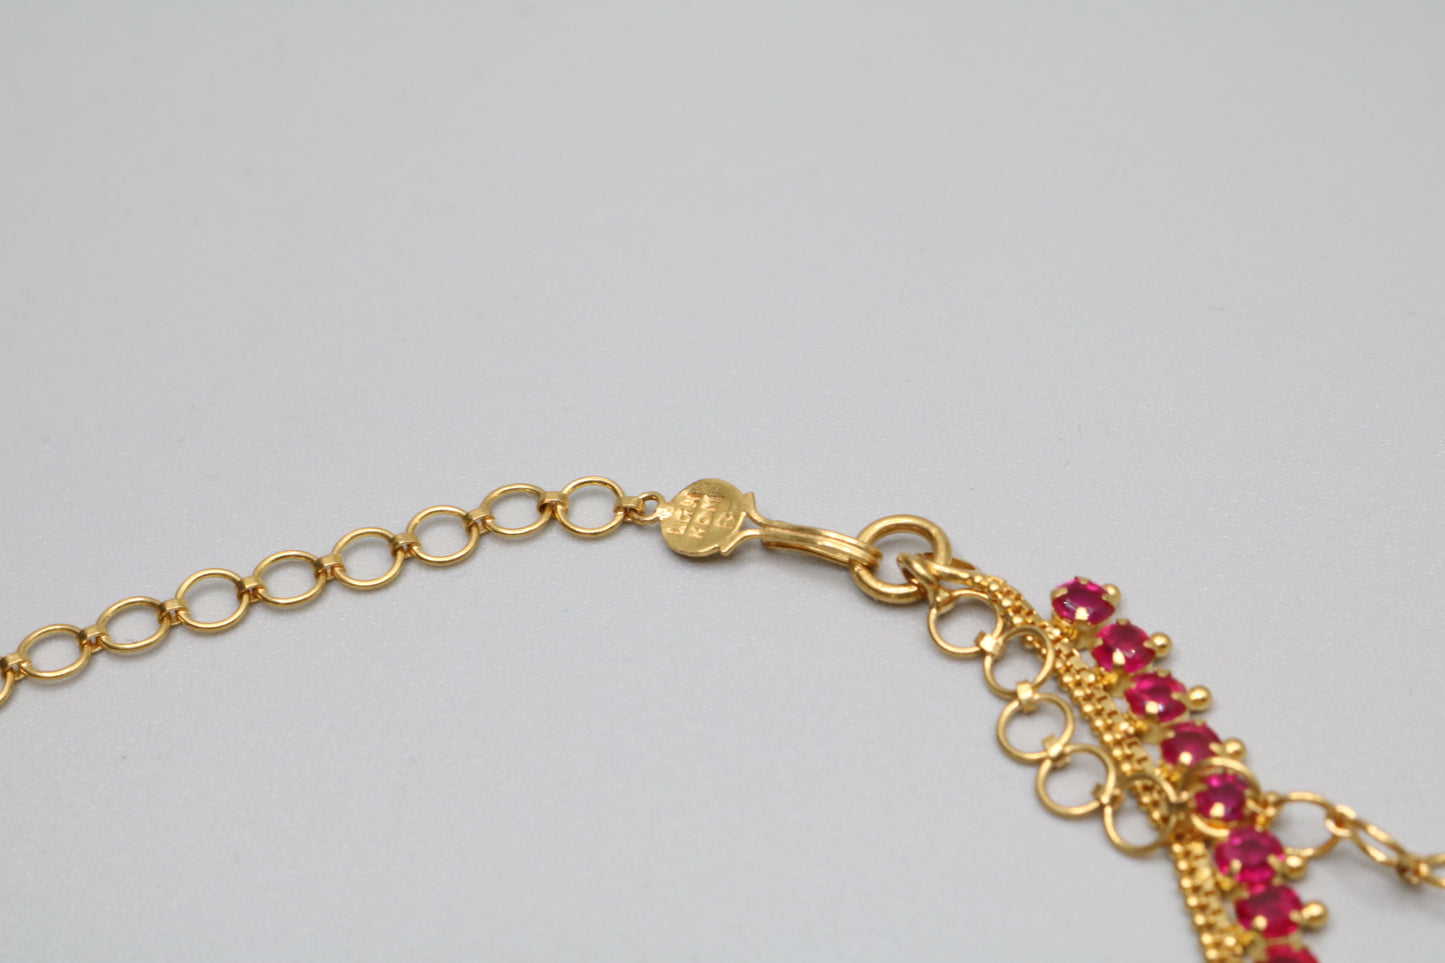 22K Yellow Gold Fancy Tennis Necklace (16.5 inches) (Local pick-up only)